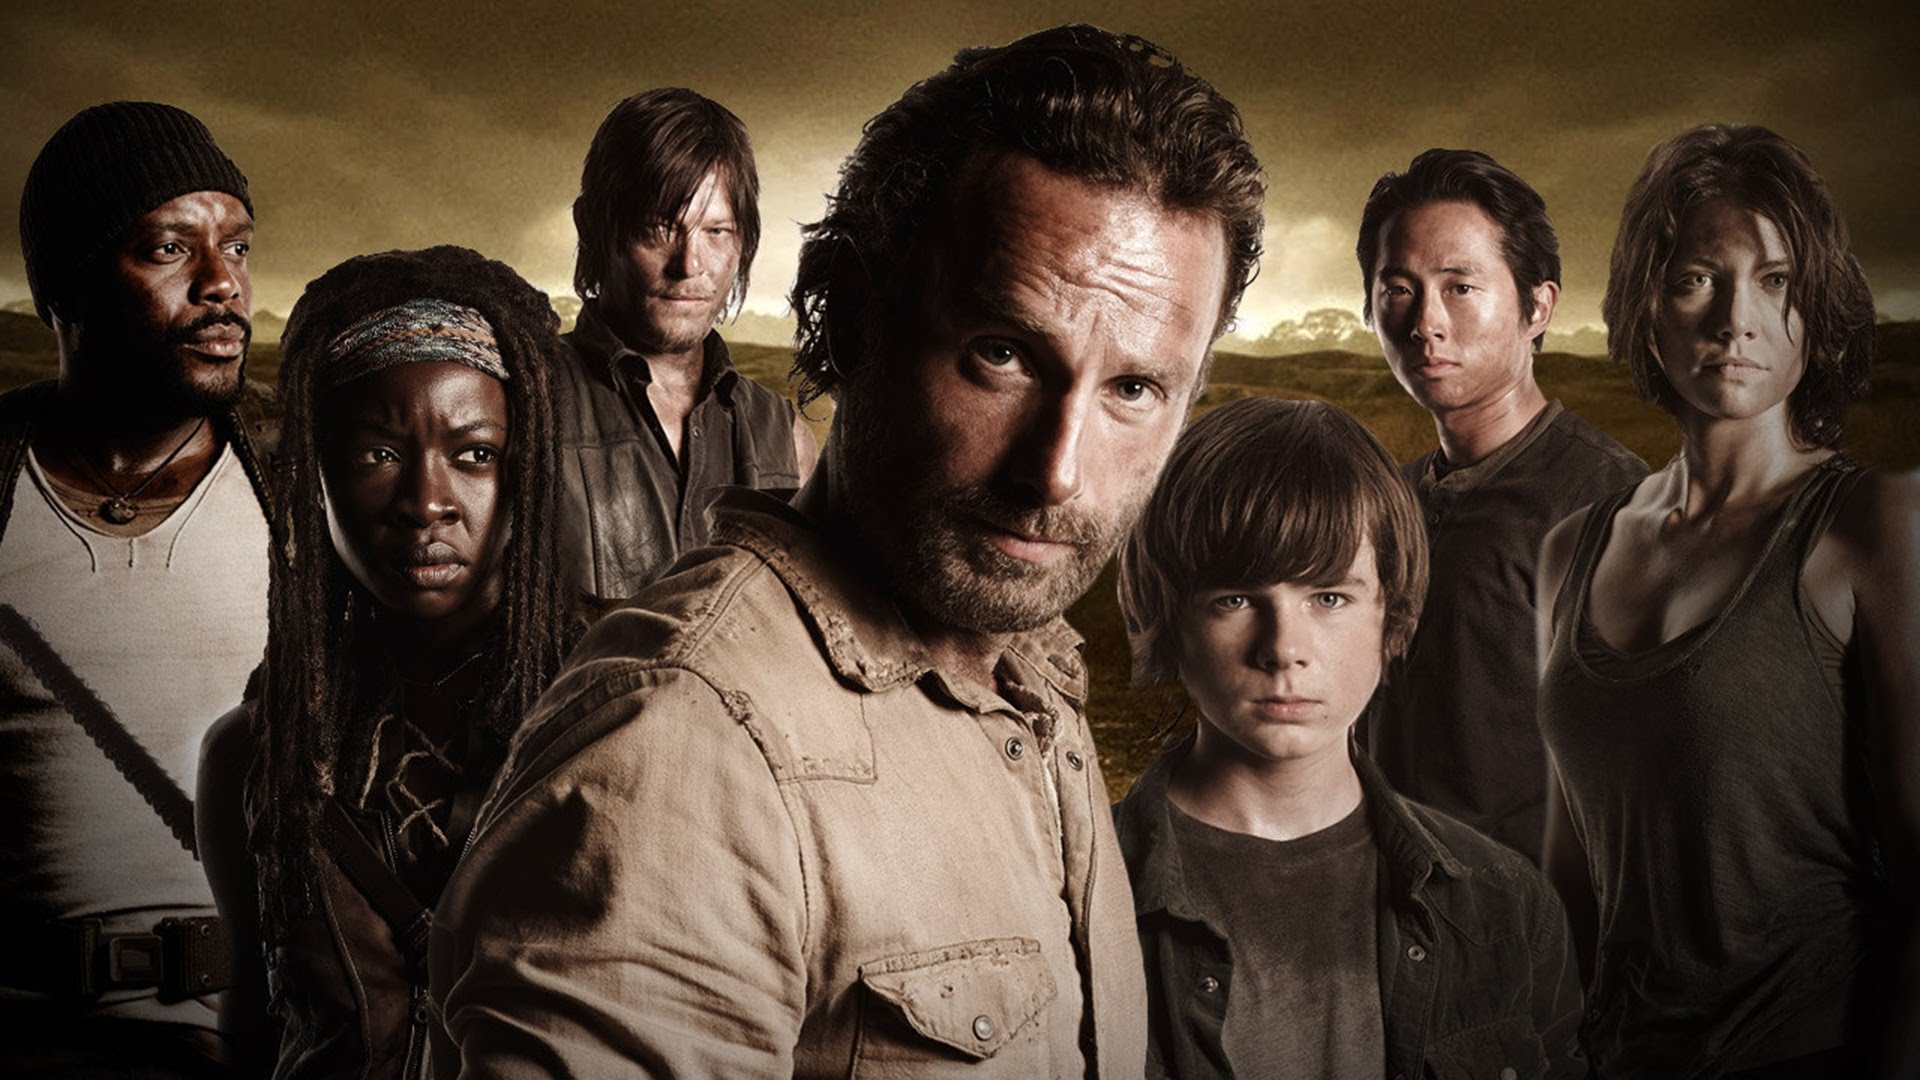 A New Walking Dead Spinoff Series is Coming & Gets a Title